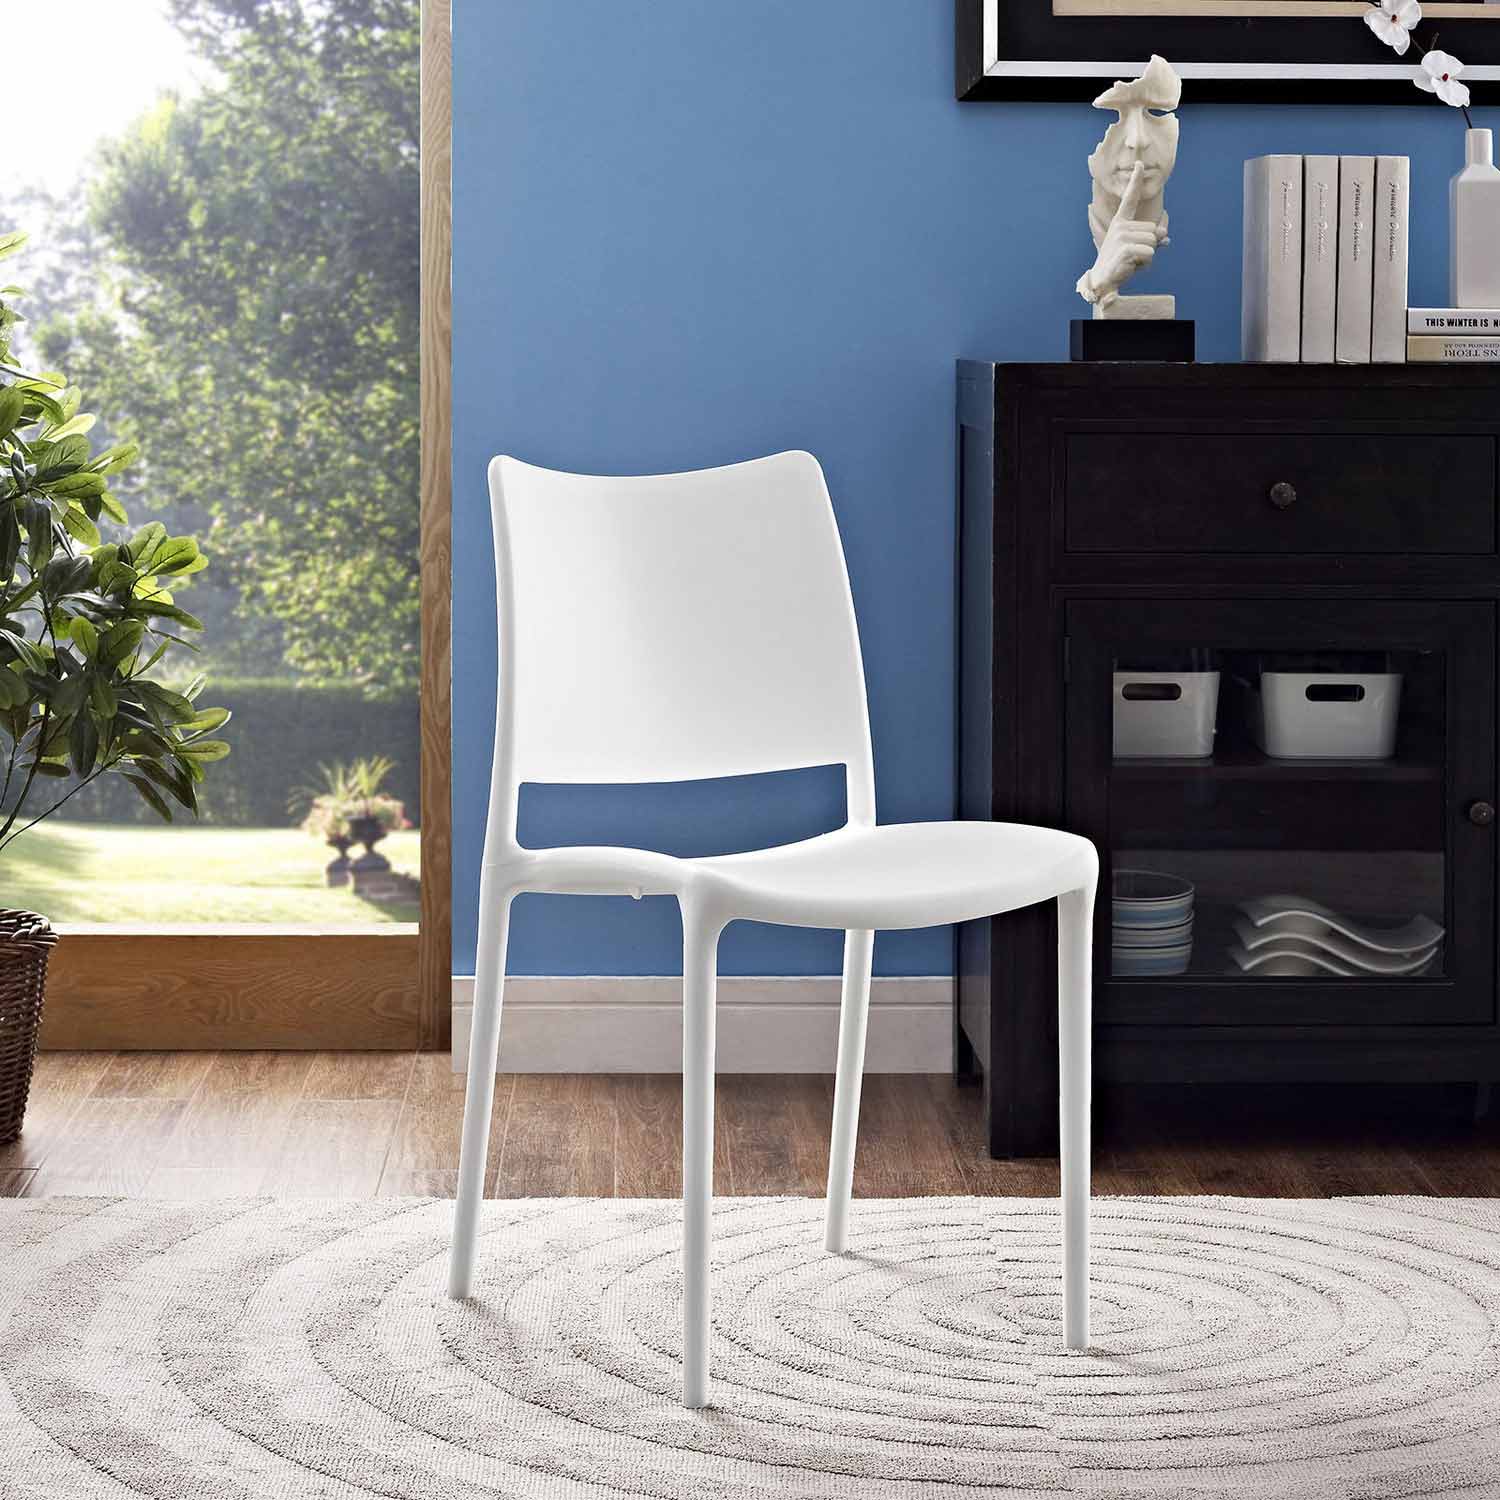 Modway Hipster Dining Side Chair - White